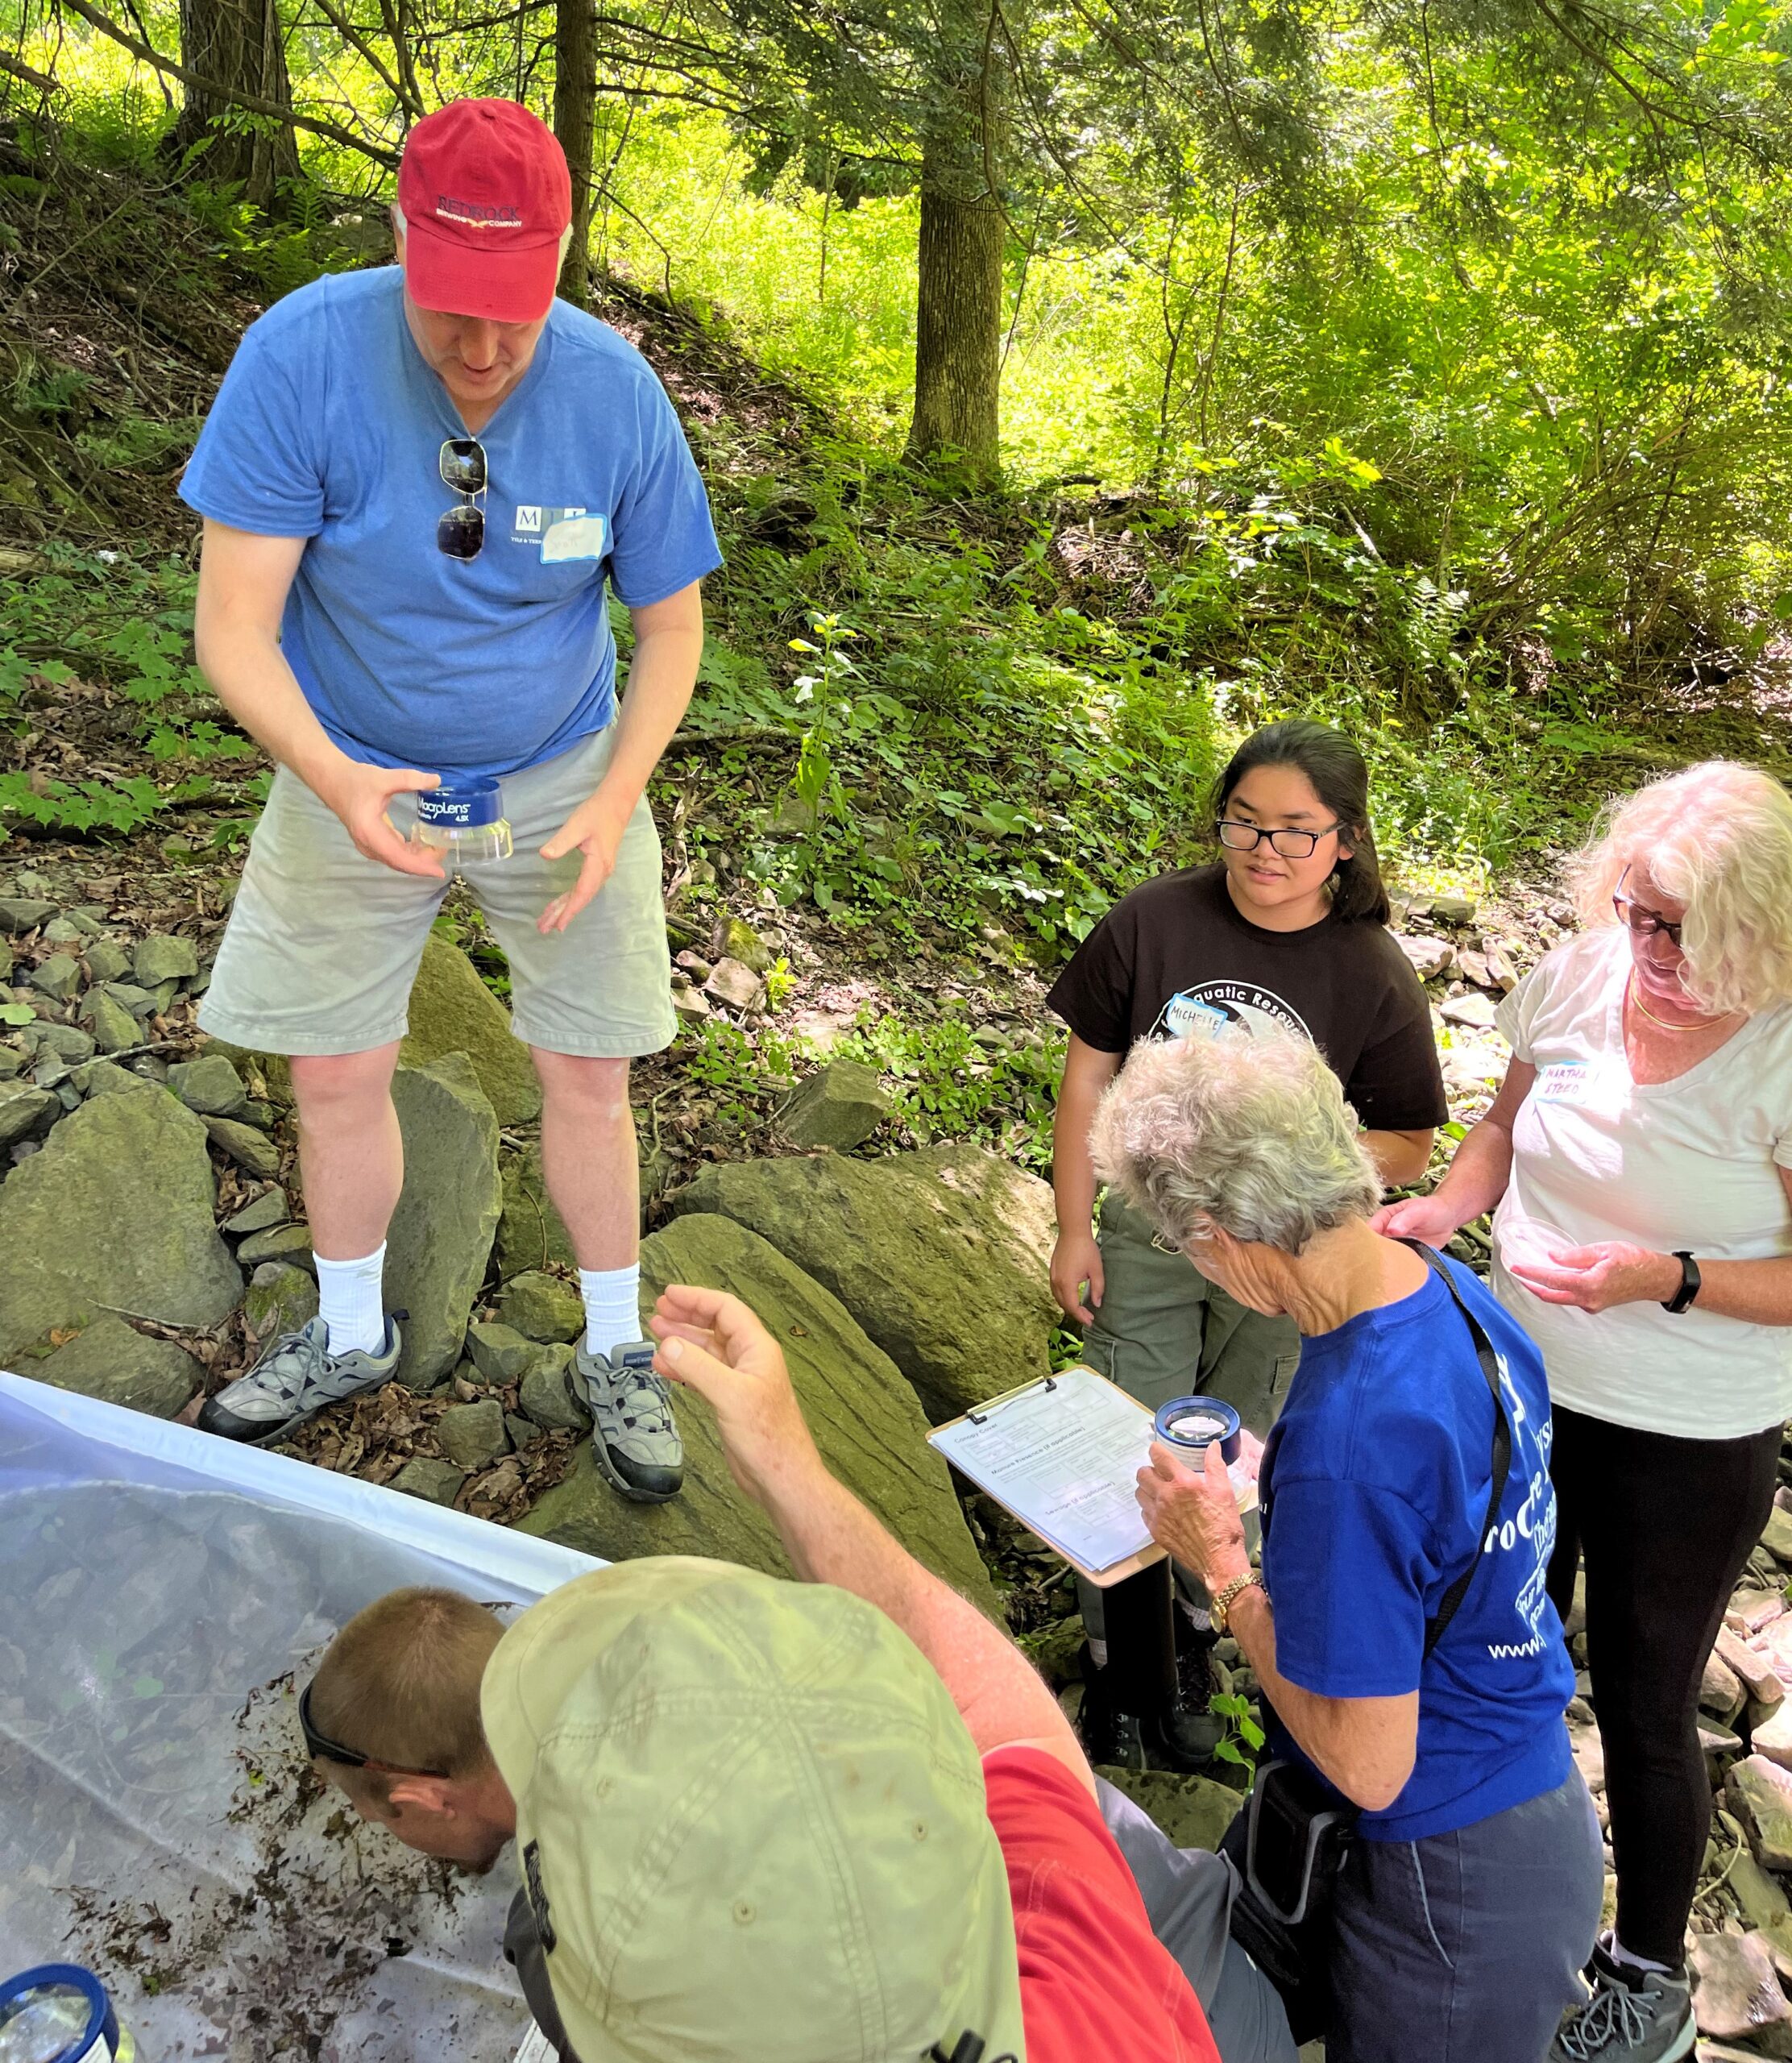 Image shows author and volunteers sorting through macroinvertebrates along the banks of a stream.